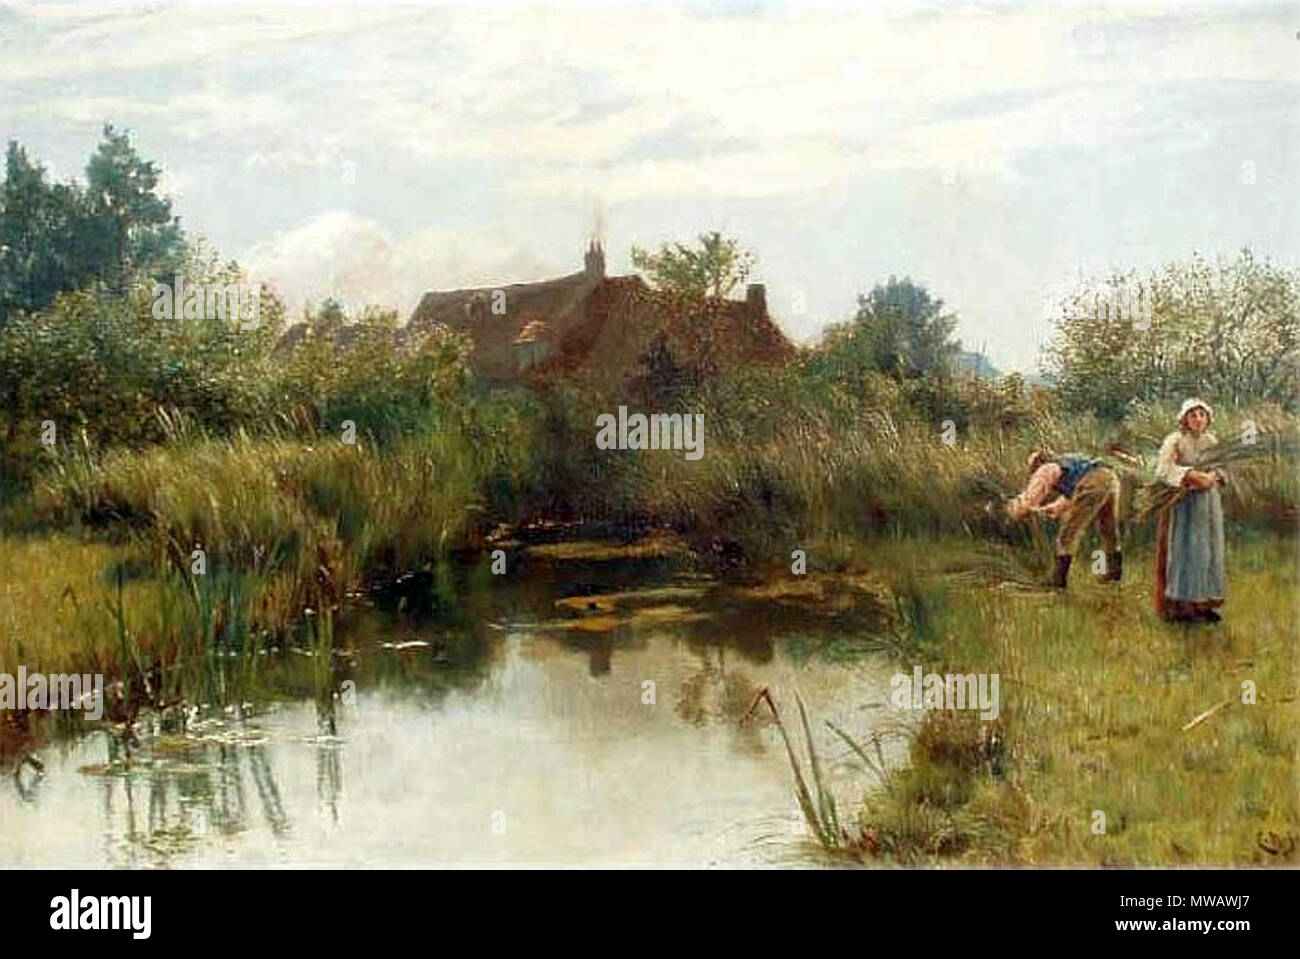 . The Reed Cutters . Unknown date.   Charles Napier Hemy  (1841–1917)    Alternative names Hemy  Description British painter British painter associated with the Newlyn School  Date of birth/death 24 May 1841 30 September 1917  Location of birth/death Newcastle upon Tyne Falmouth  Authority control  : Q1065621 VIAF: 11308905 ISNI: 0000 0000 6703 8258 ULAN: 500013011 LCCN: n85364258 GND: 174219679 WorldCat 123 Charles Napier Hemy - The Reed Cutters Stock Photo